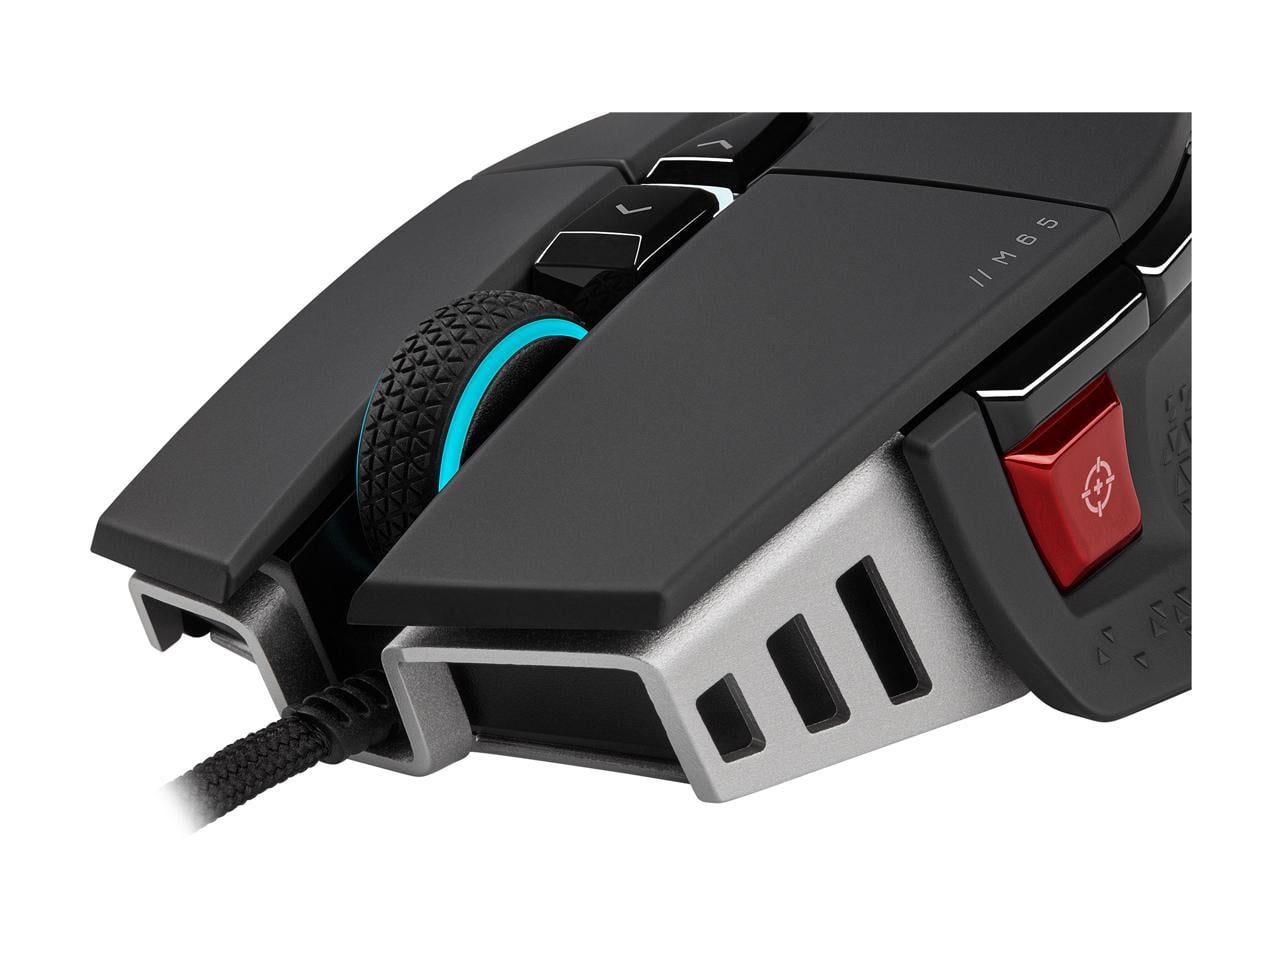 Corsair M65 RGB Ultra Tunable FPS Gaming Mouse Marksman 26,000 DPI Optical  Sensor, Optical Switches, AXON Hyper-Processing Technology, Sensor Fusion  Control, Tunable Weight System - Black